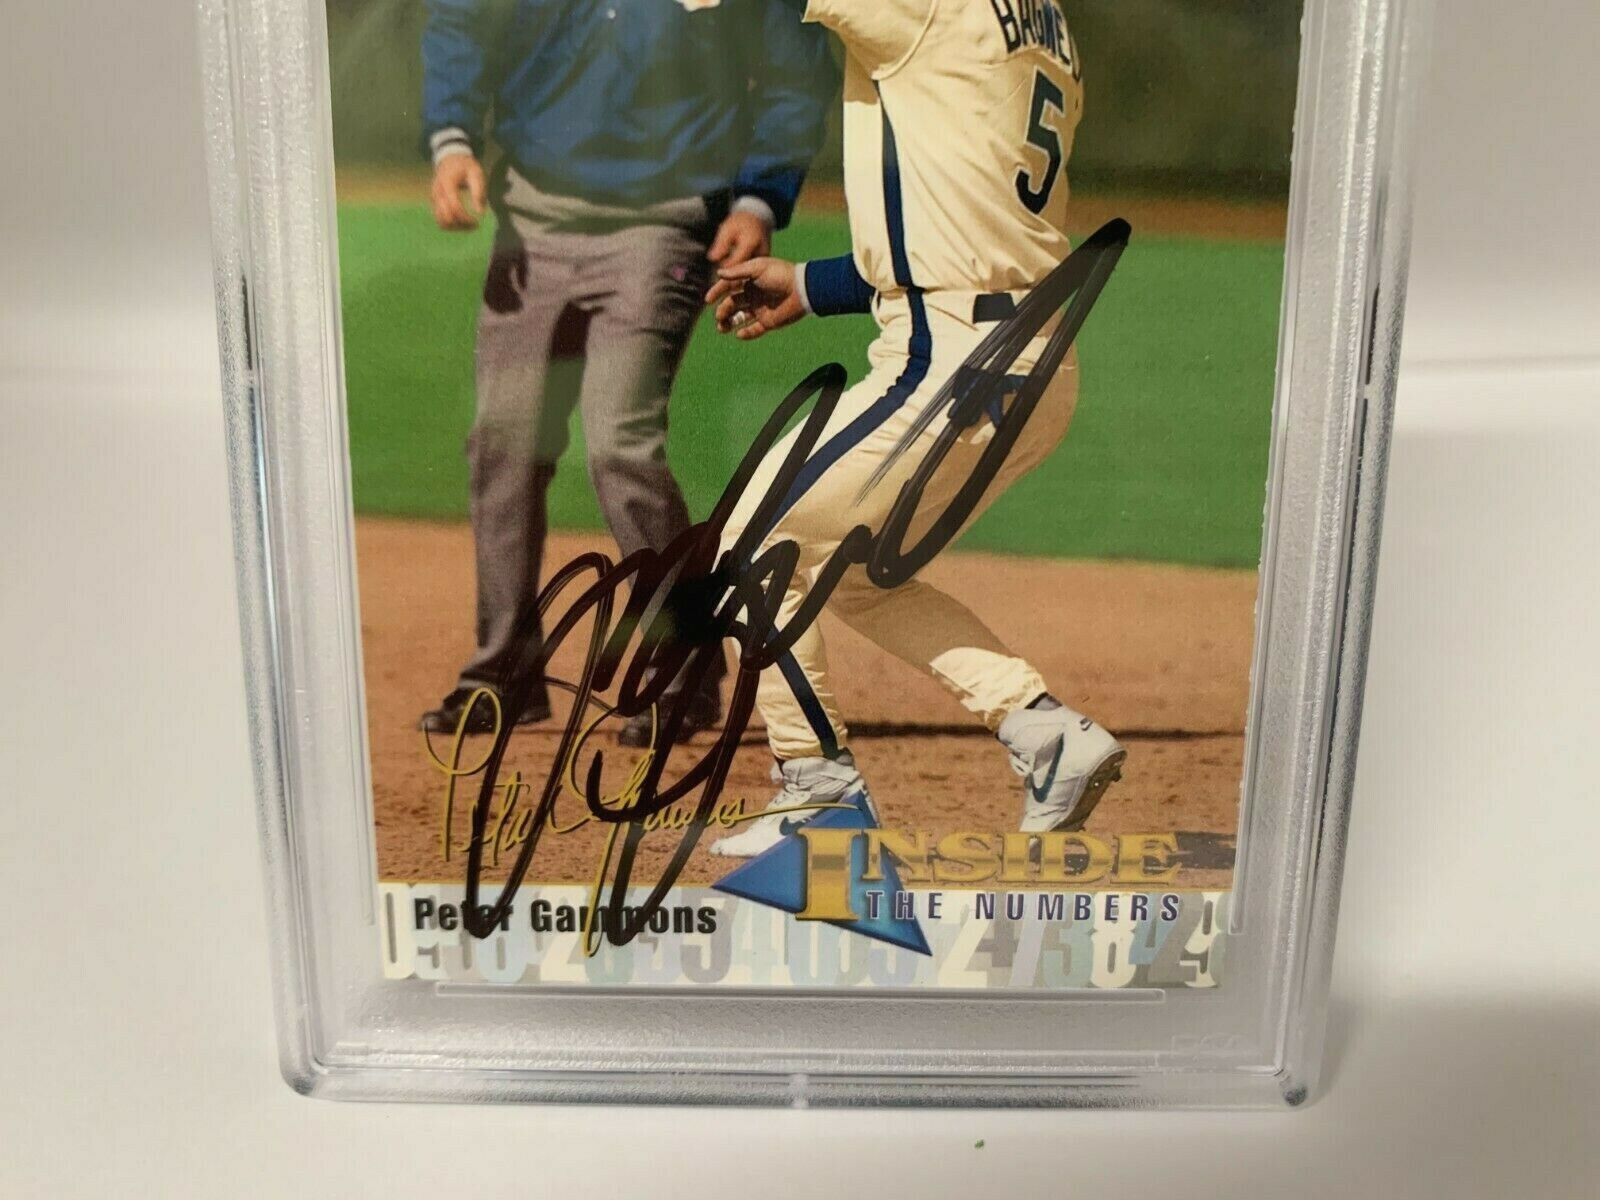 Jeff Bagwell Astros Autographed 1994 Donruss Baseball Card PSA Certified Slabbed